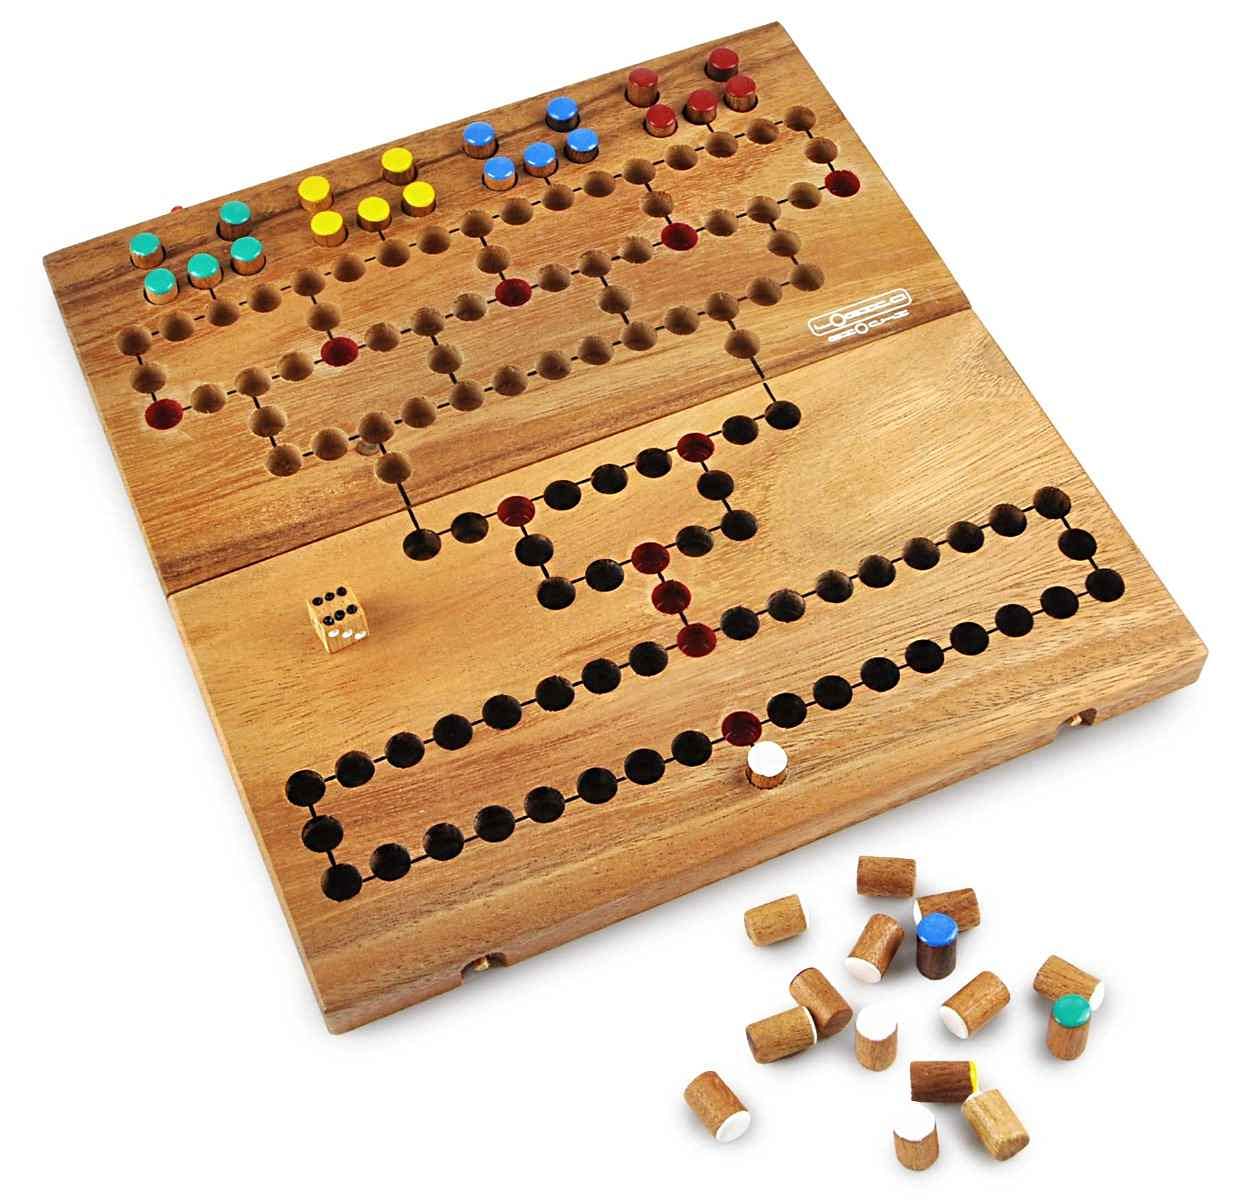 Logica Puzzles Art. Malefiz - Barricade - Wooden Board Games - Strategy Game for 2/4 Players - Family Game